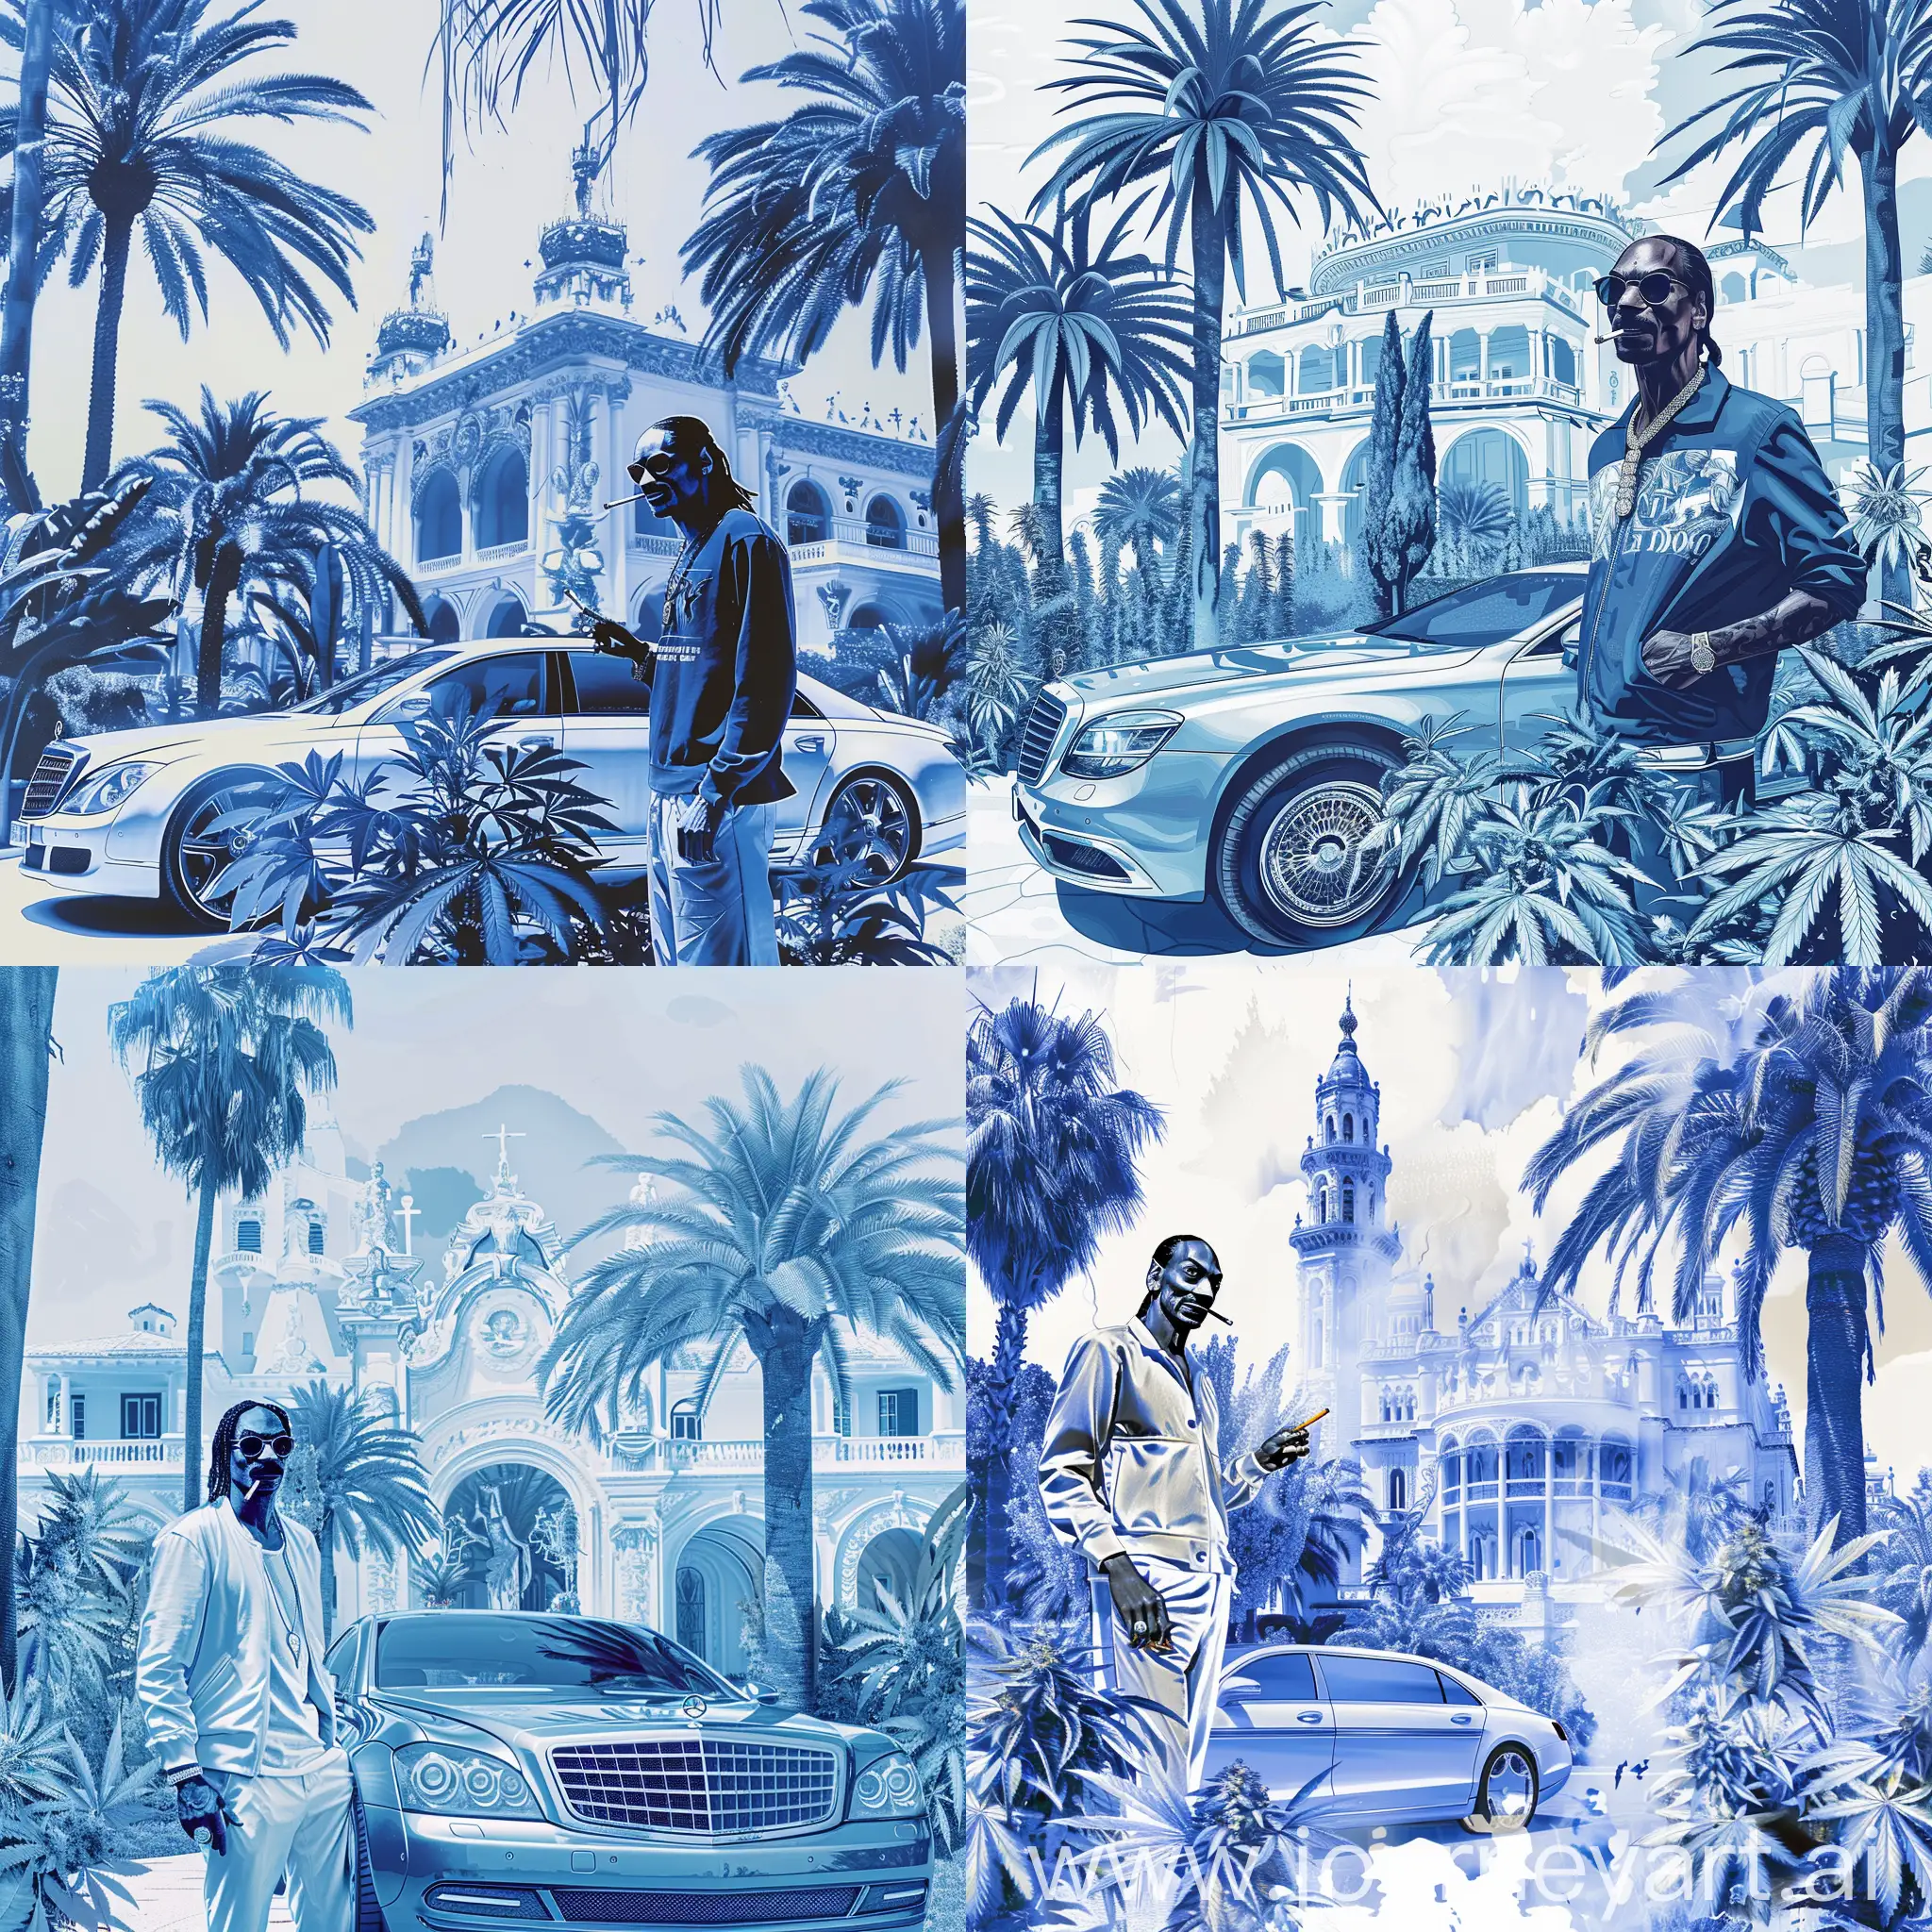 Snoop-Dogg-Posing-with-Maybach-and-Cigarette-at-Opulent-Cannabis-Palace